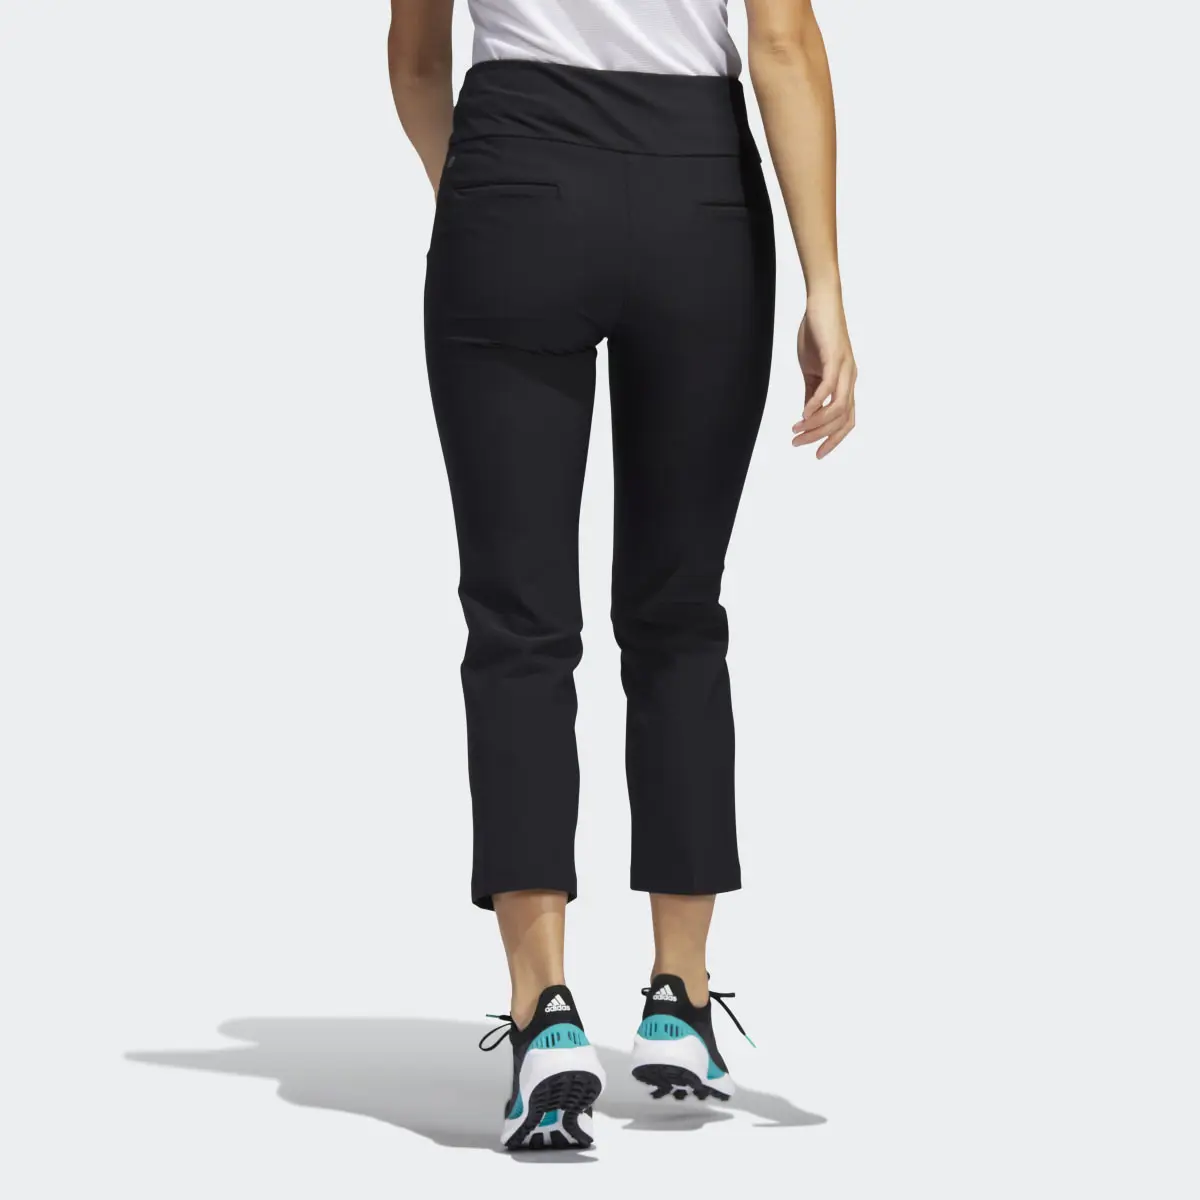 Adidas Pull-On Ankle Pull-On Ankle Golf Pants. 2